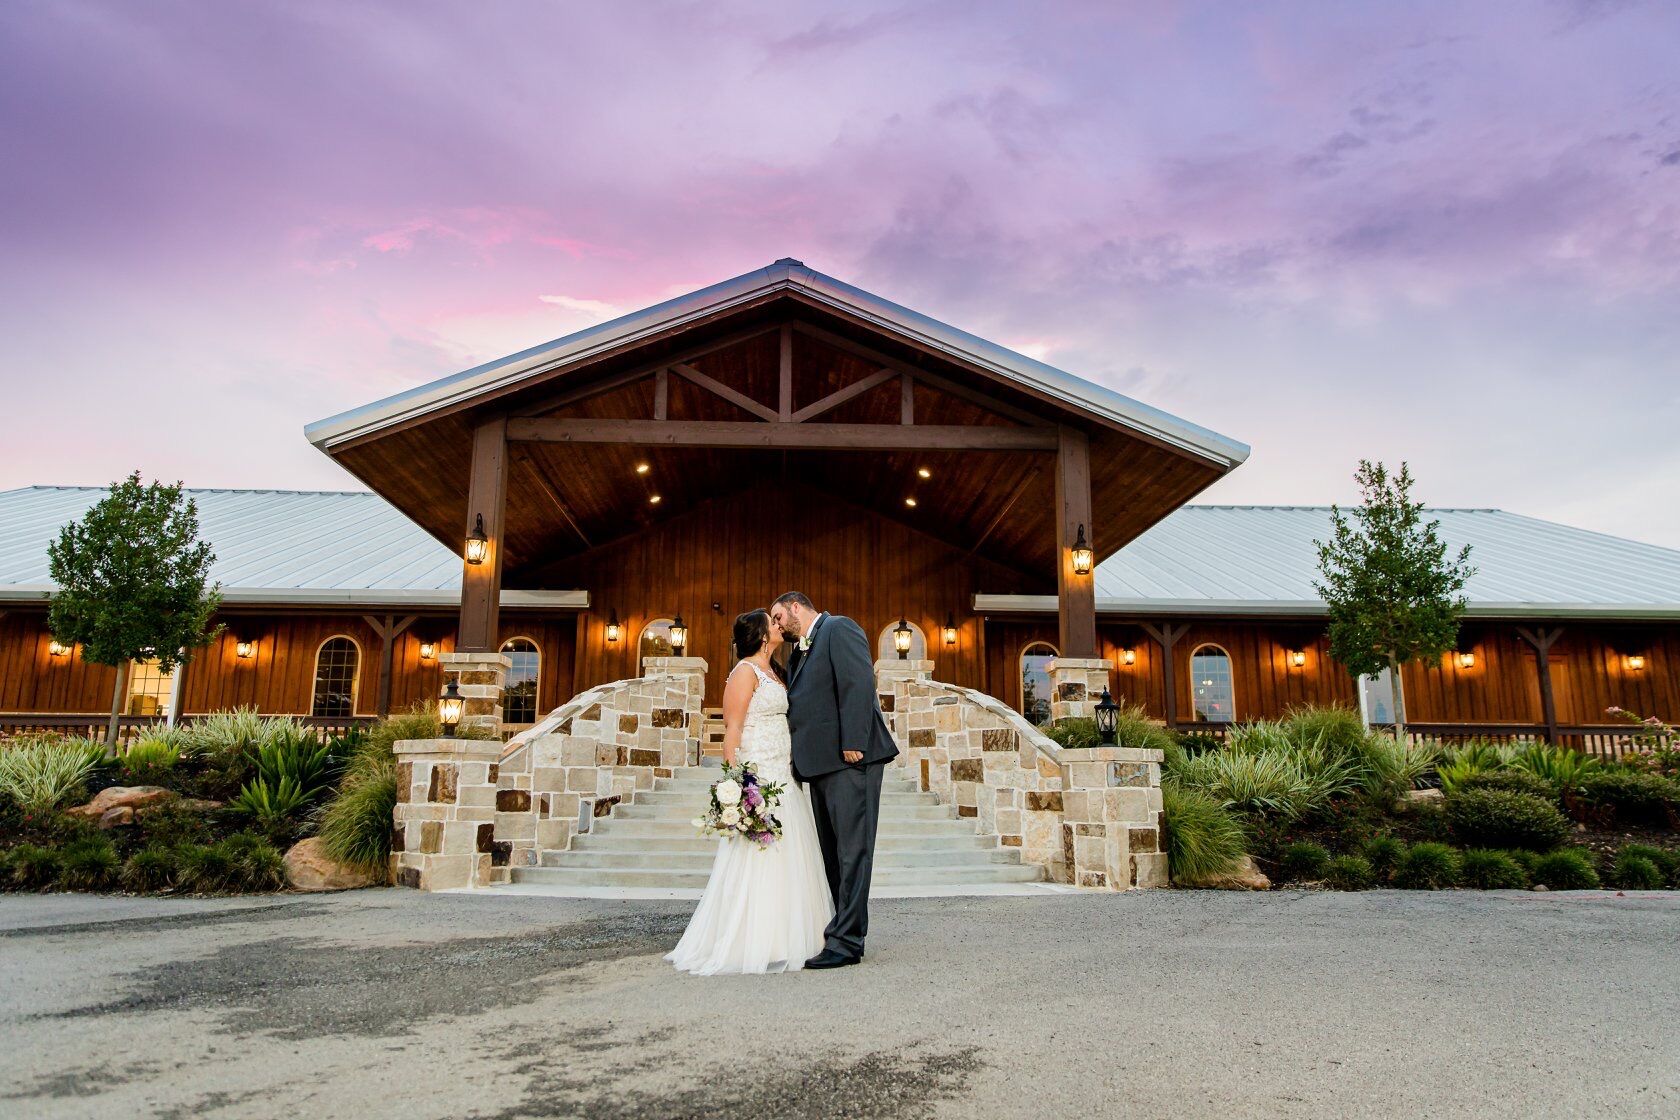  Cypress Tx Wedding Venues of the decade The ultimate guide 